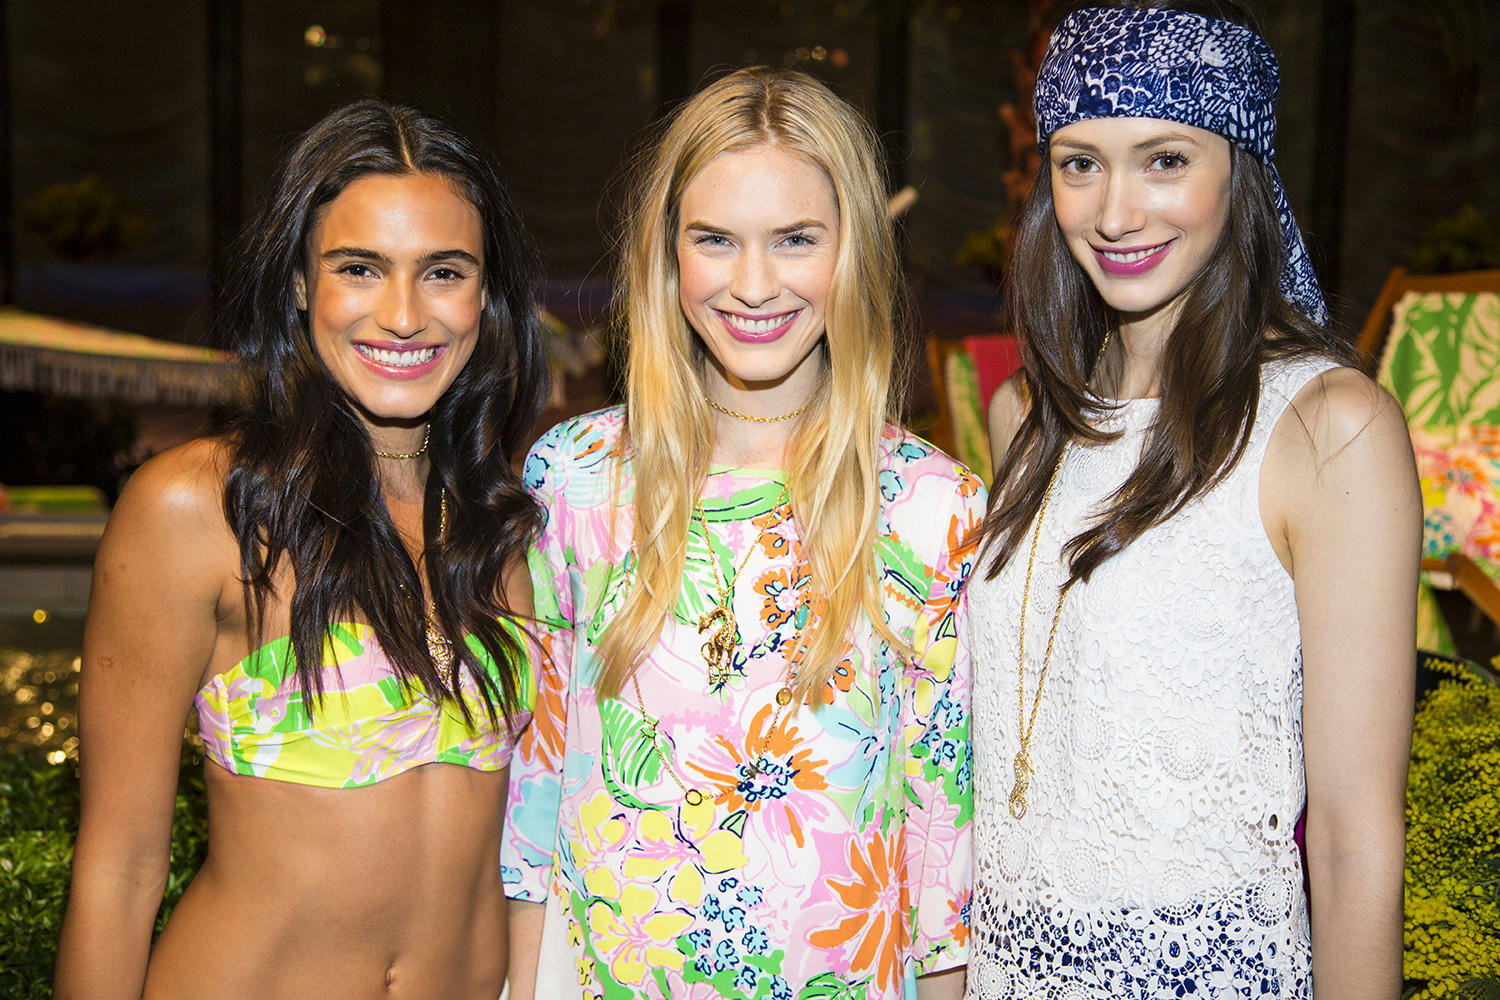 Target is partnering with Lilly Pulitzer on Spring Collection